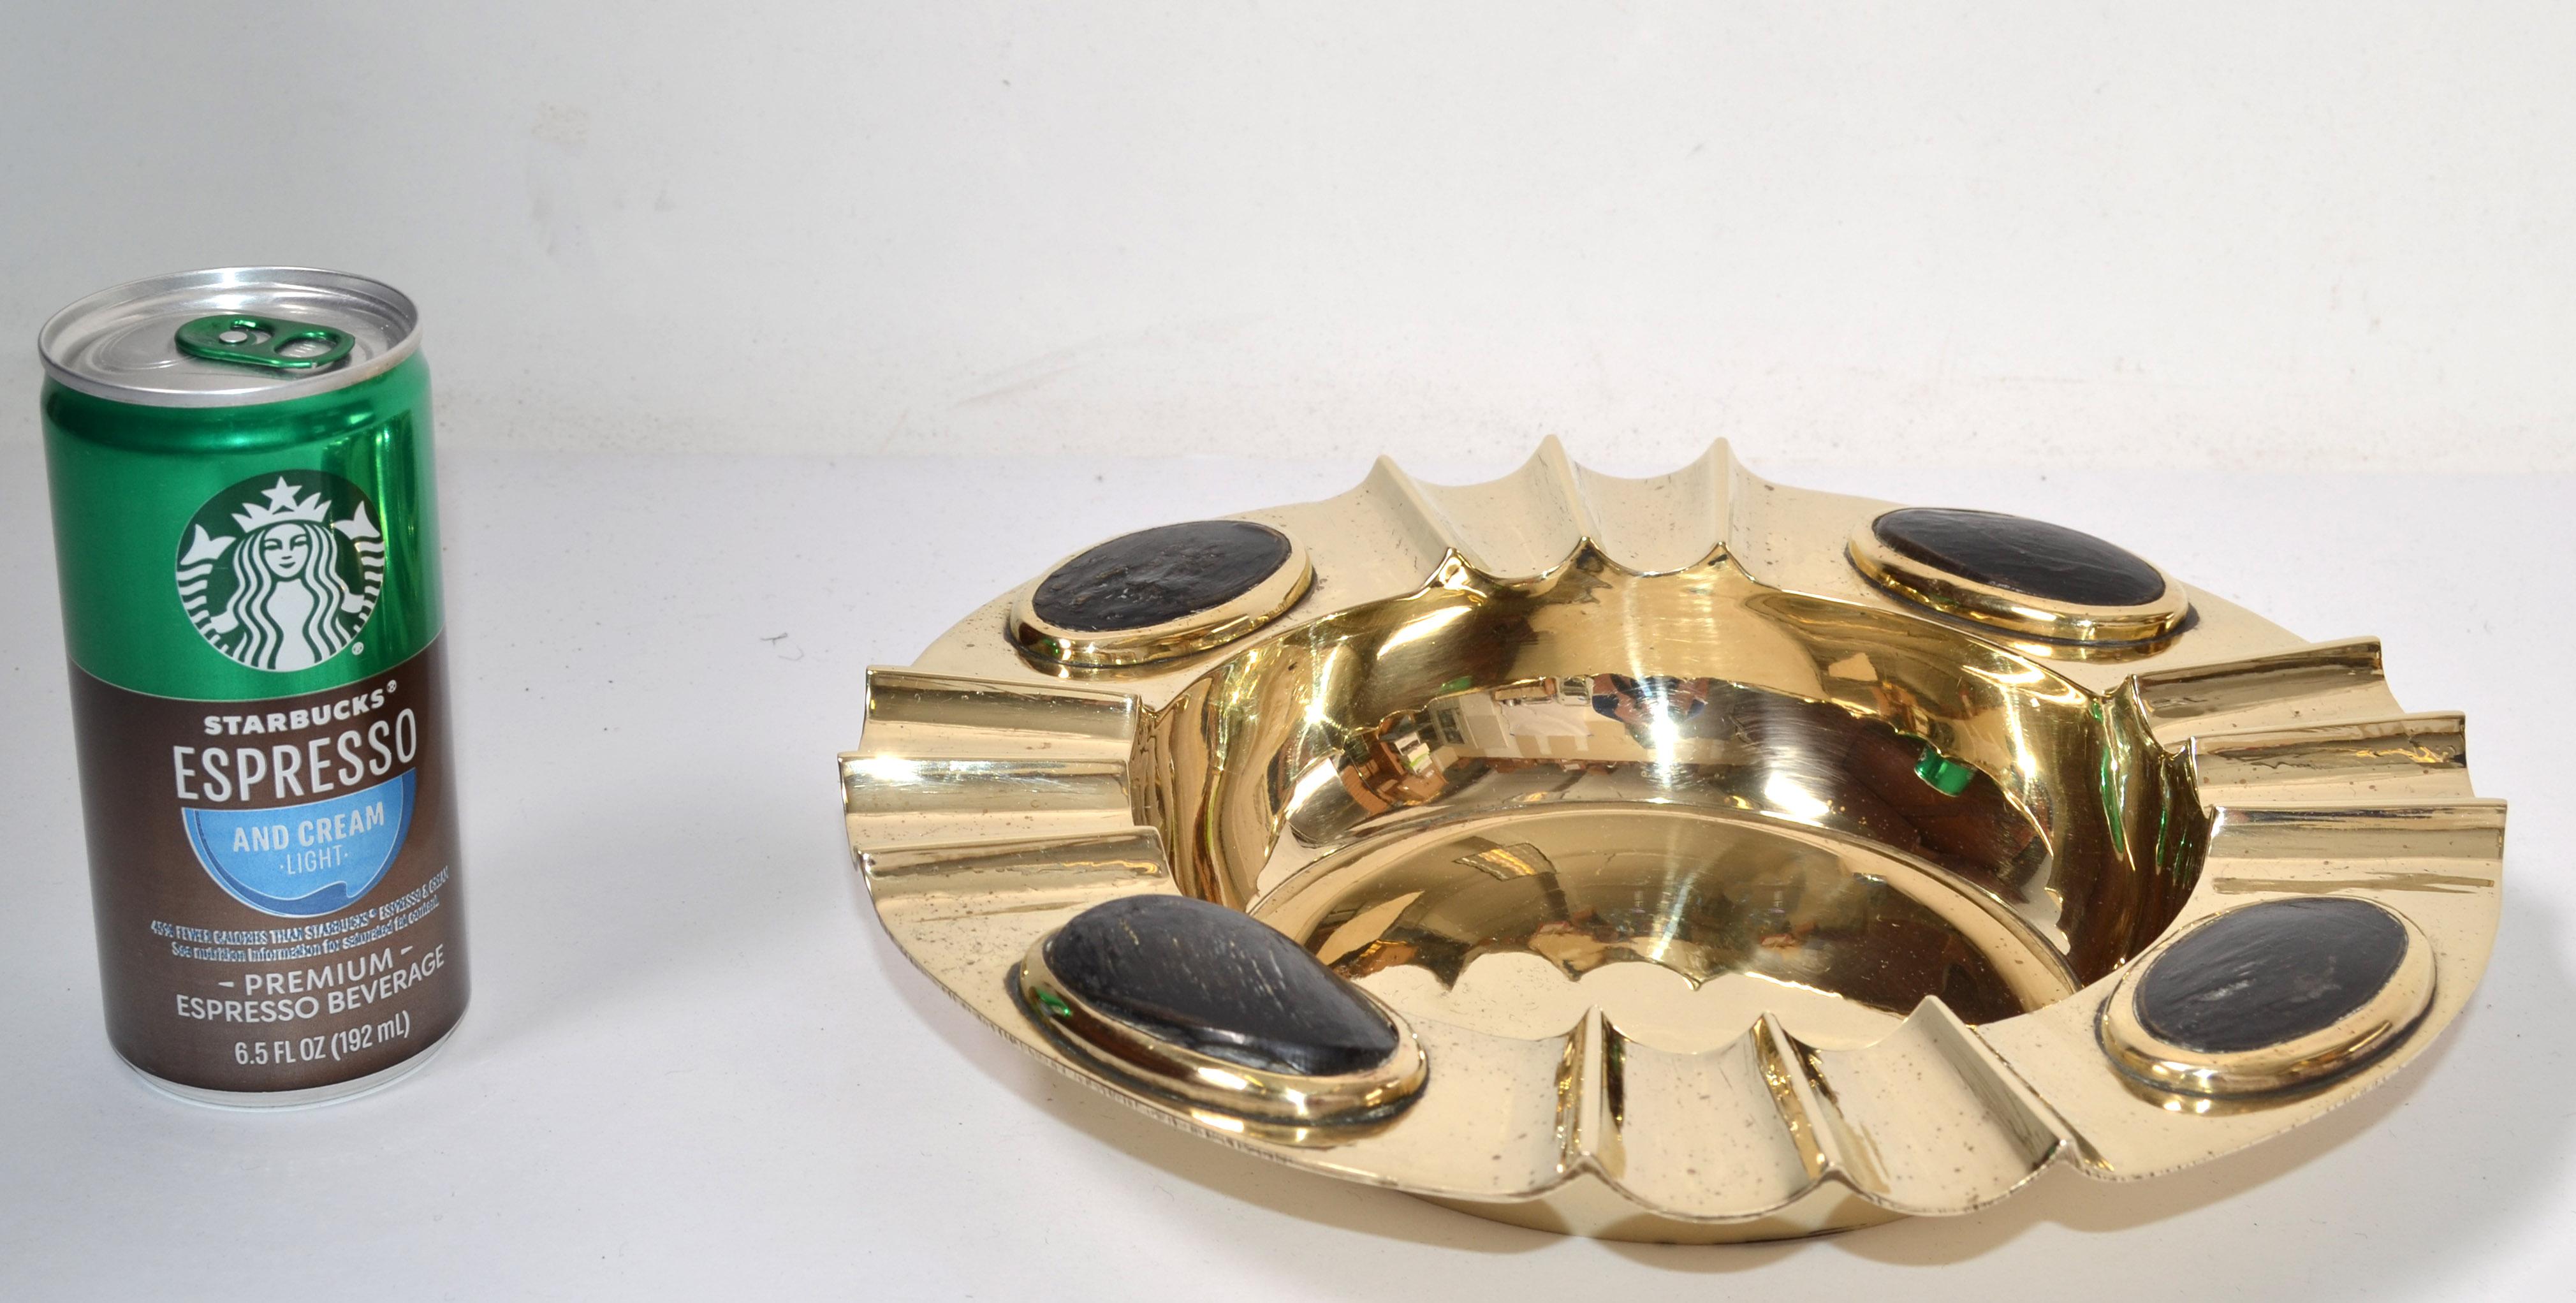 Art Deco Style Vintage Polished Bronze Black Bakelite Cigar Ashtray India In Good Condition For Sale In Miami, FL